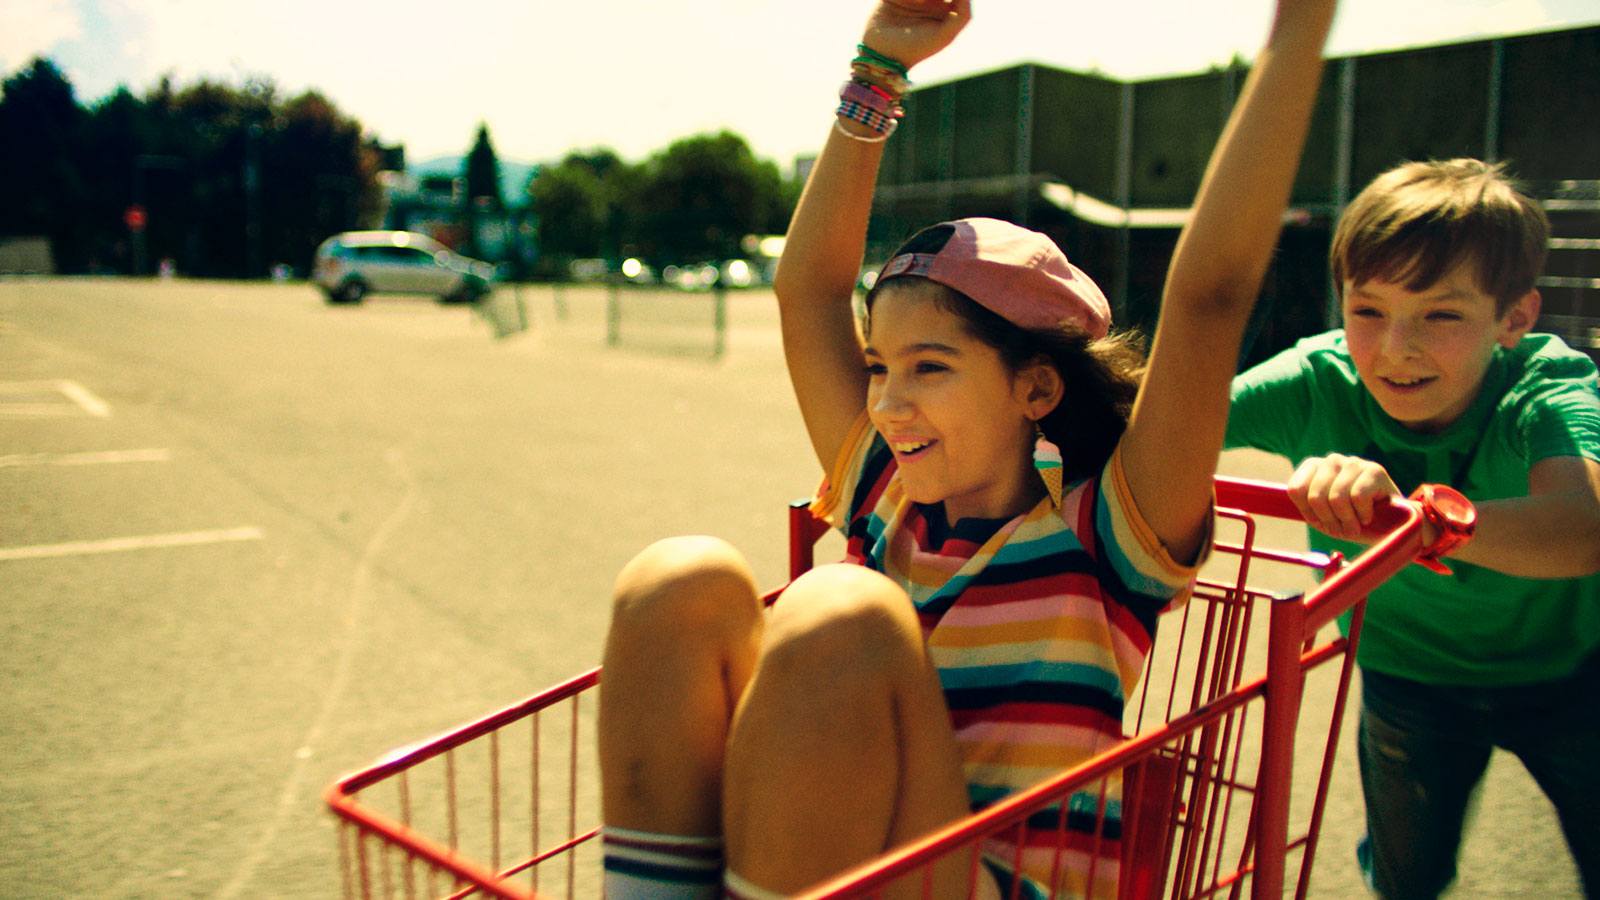 Young boy pushing girl in shopping cart in a parking lot on a bright summer day